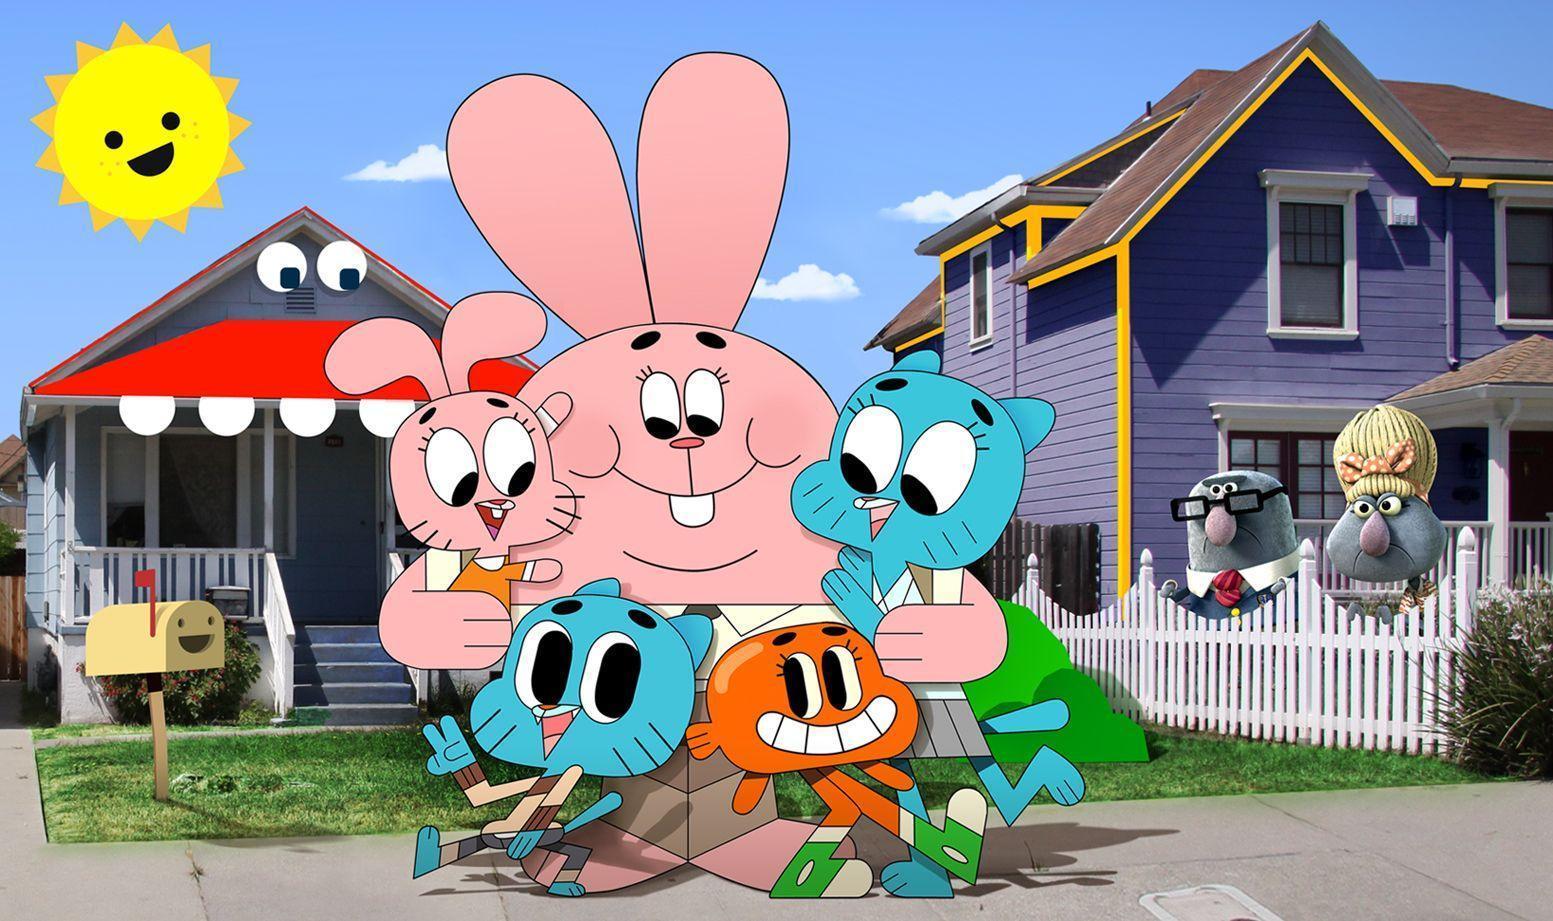 1000+ image about The amazing world of gumball.